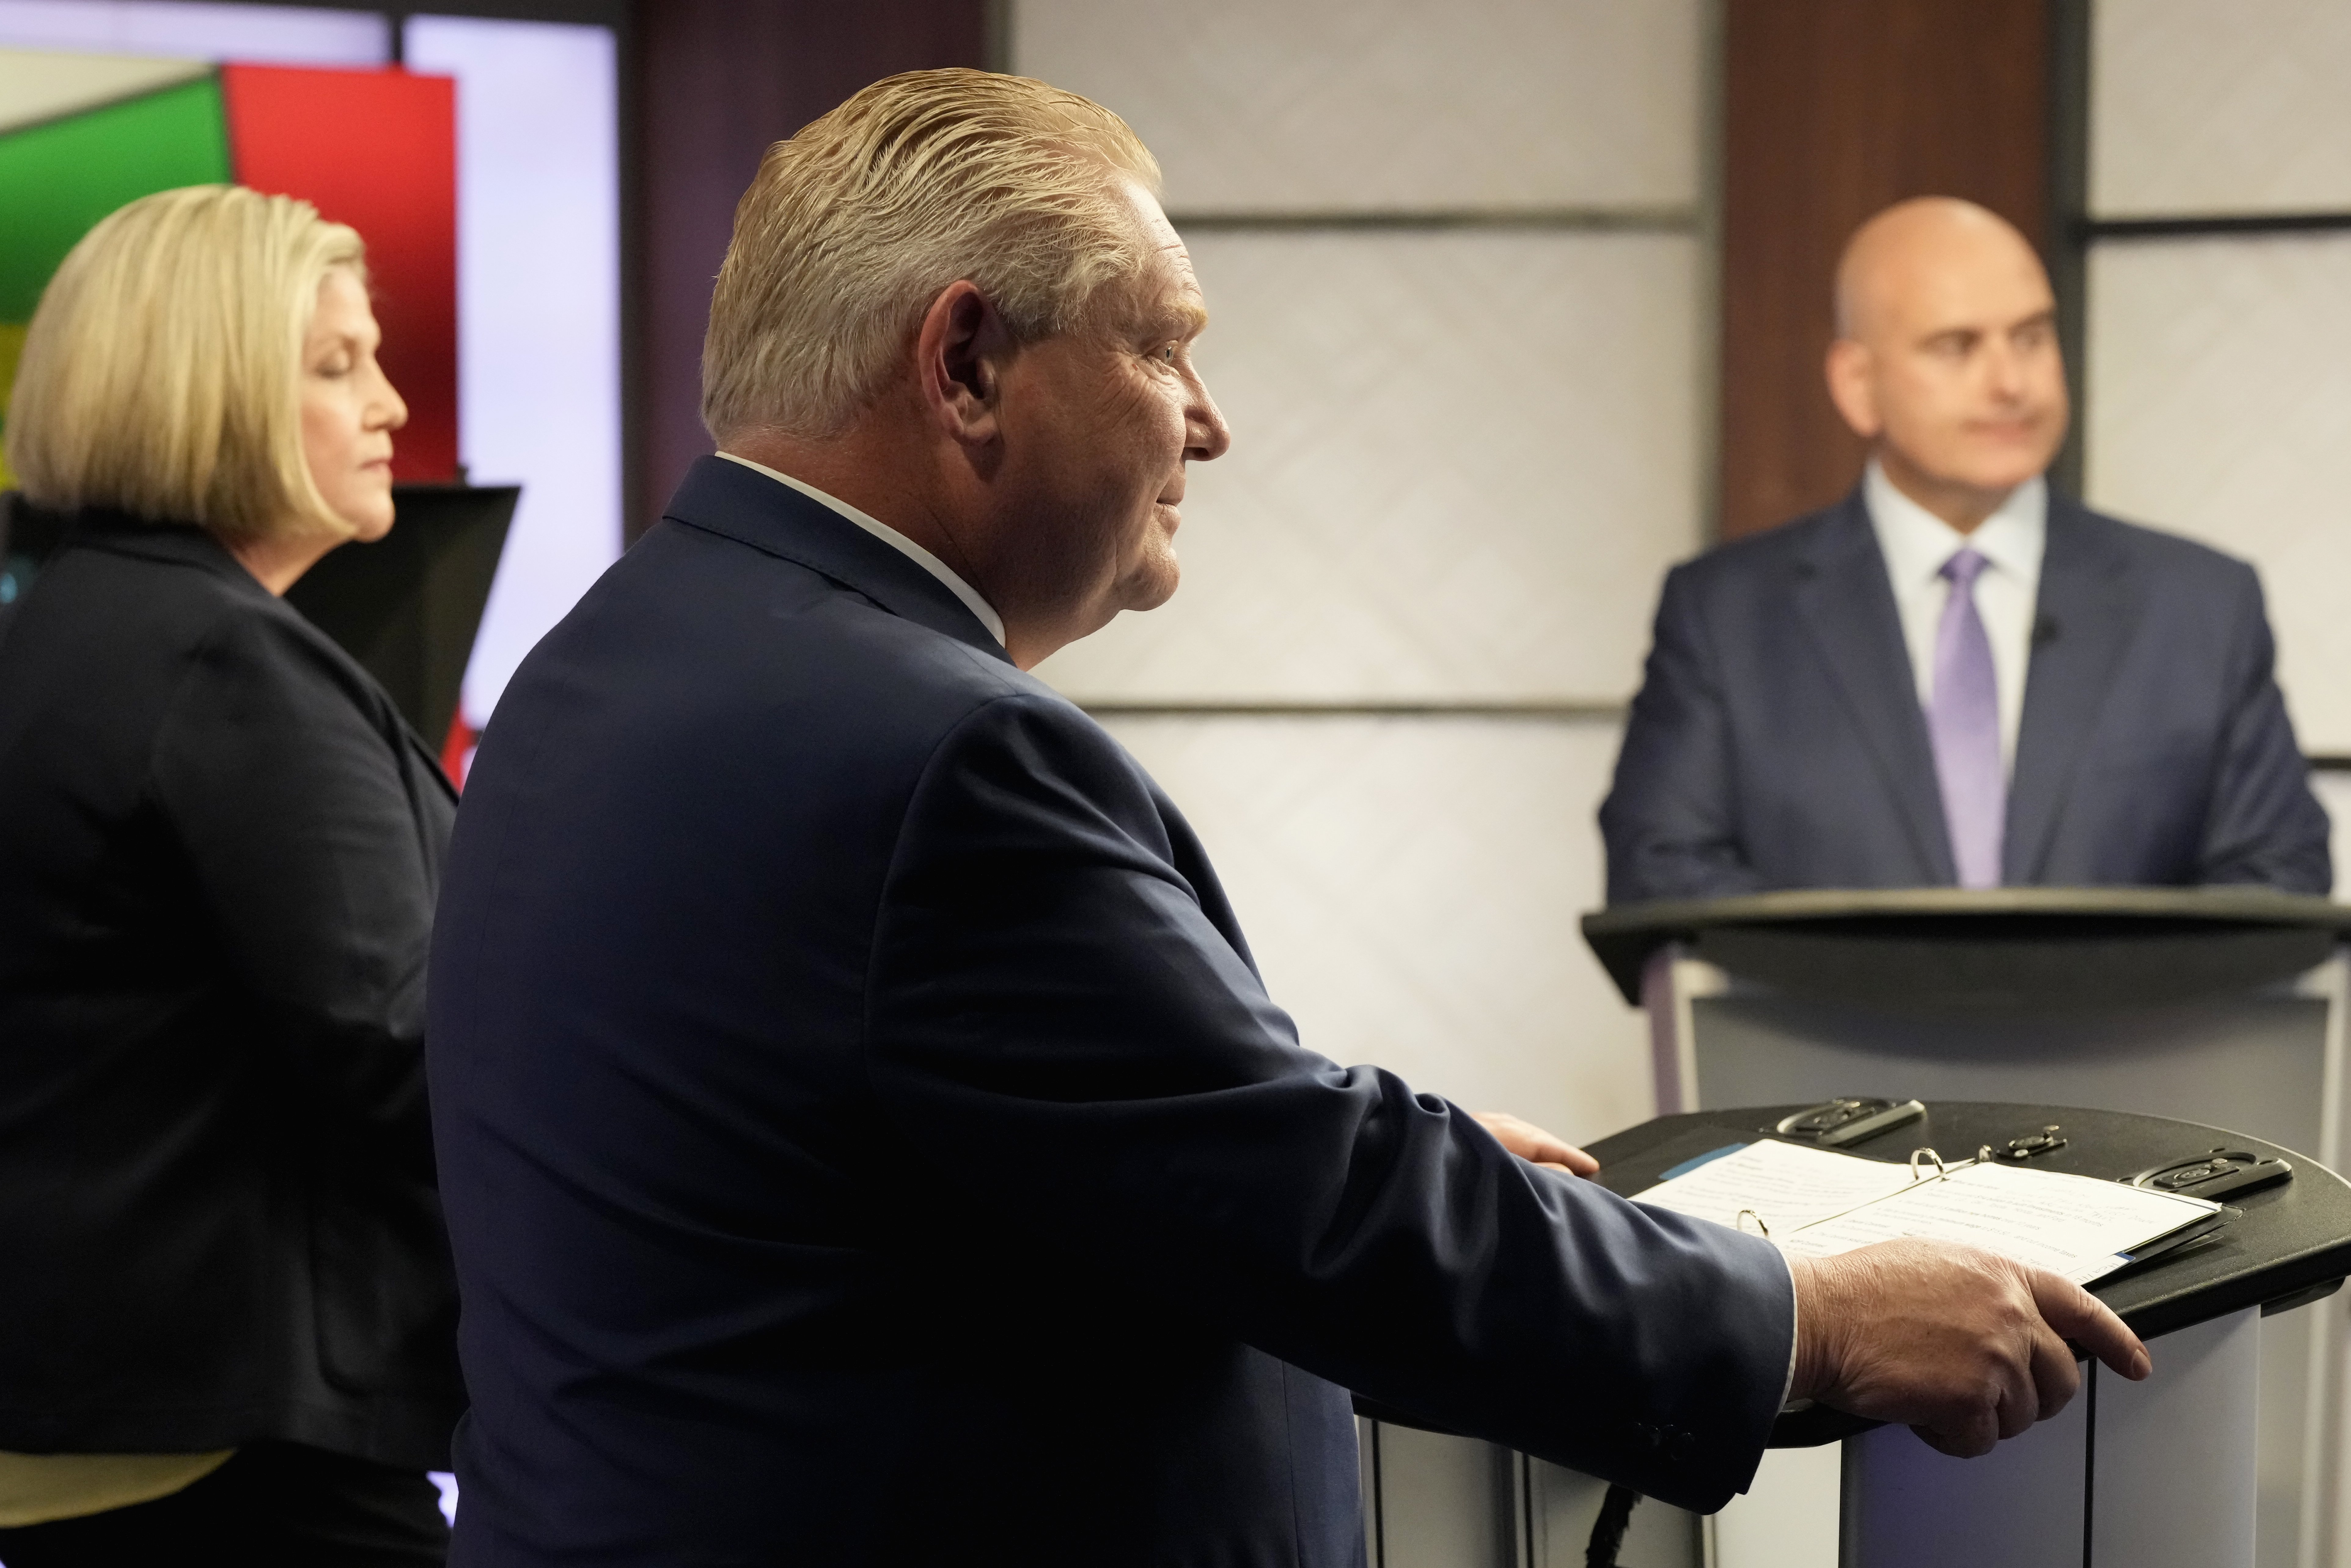 Horwath and Del Duca discourage strategic voting on eve of election